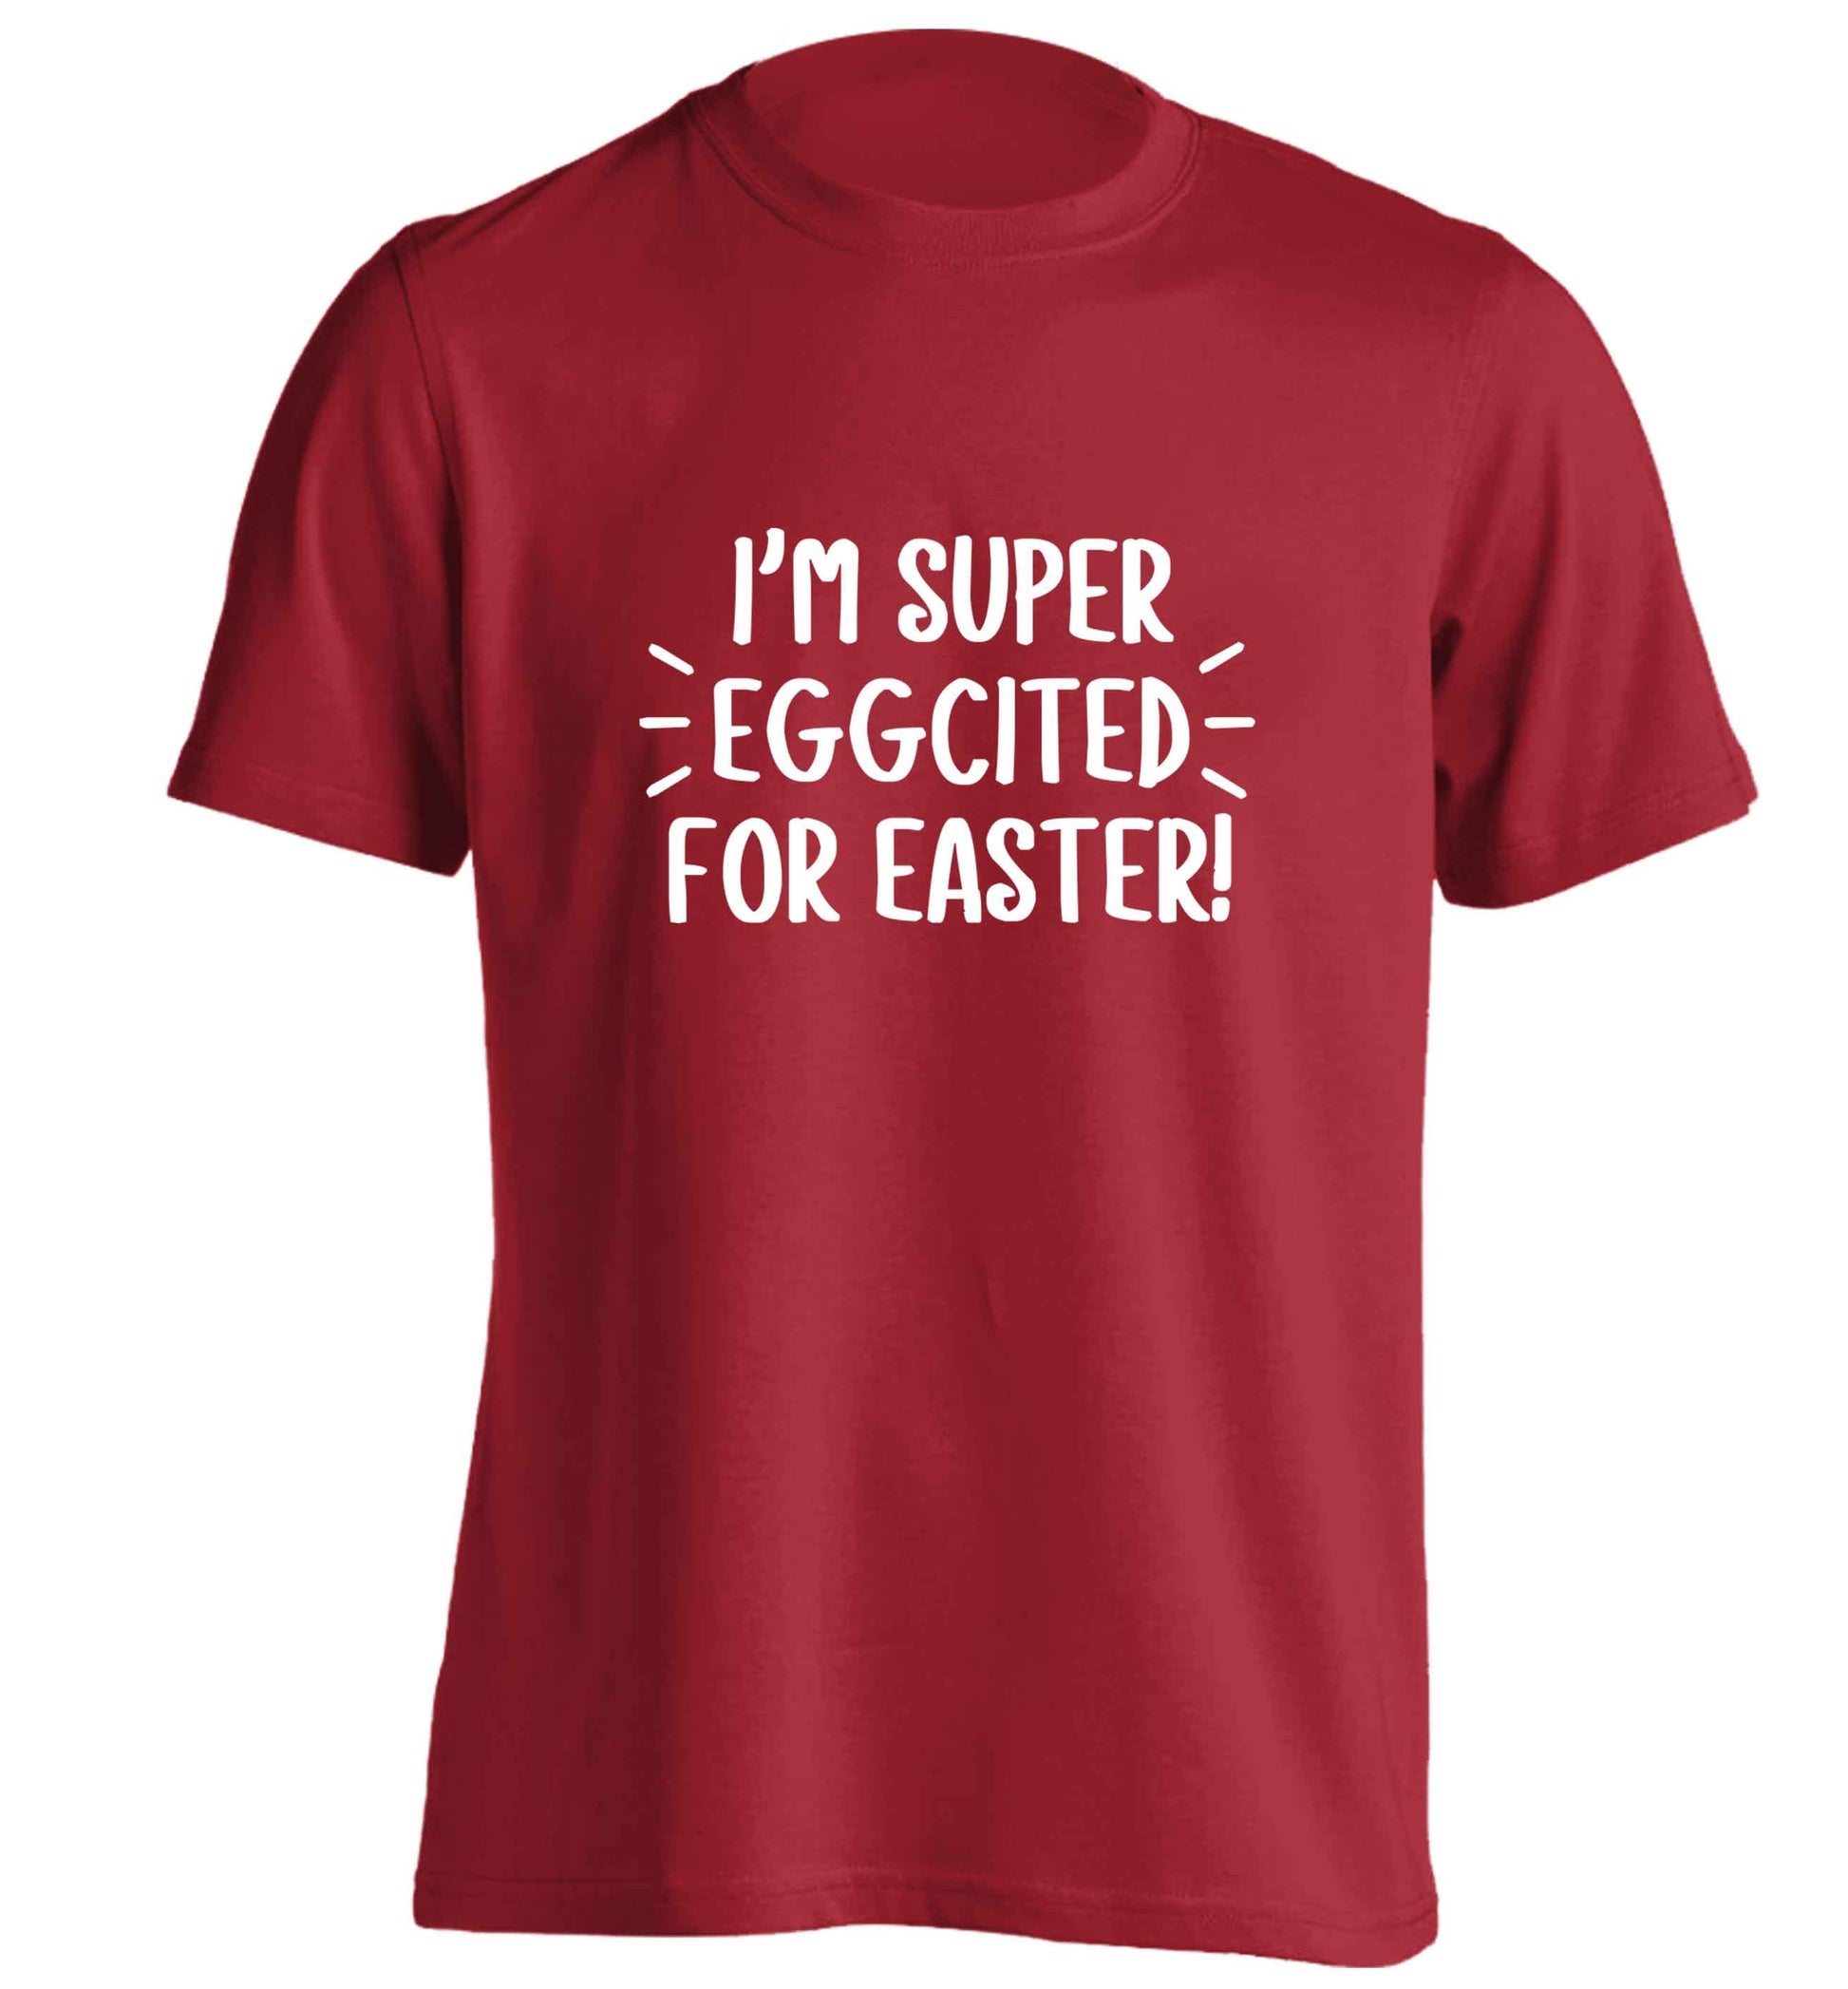 I'm super eggcited for Easter adults unisex red Tshirt 2XL